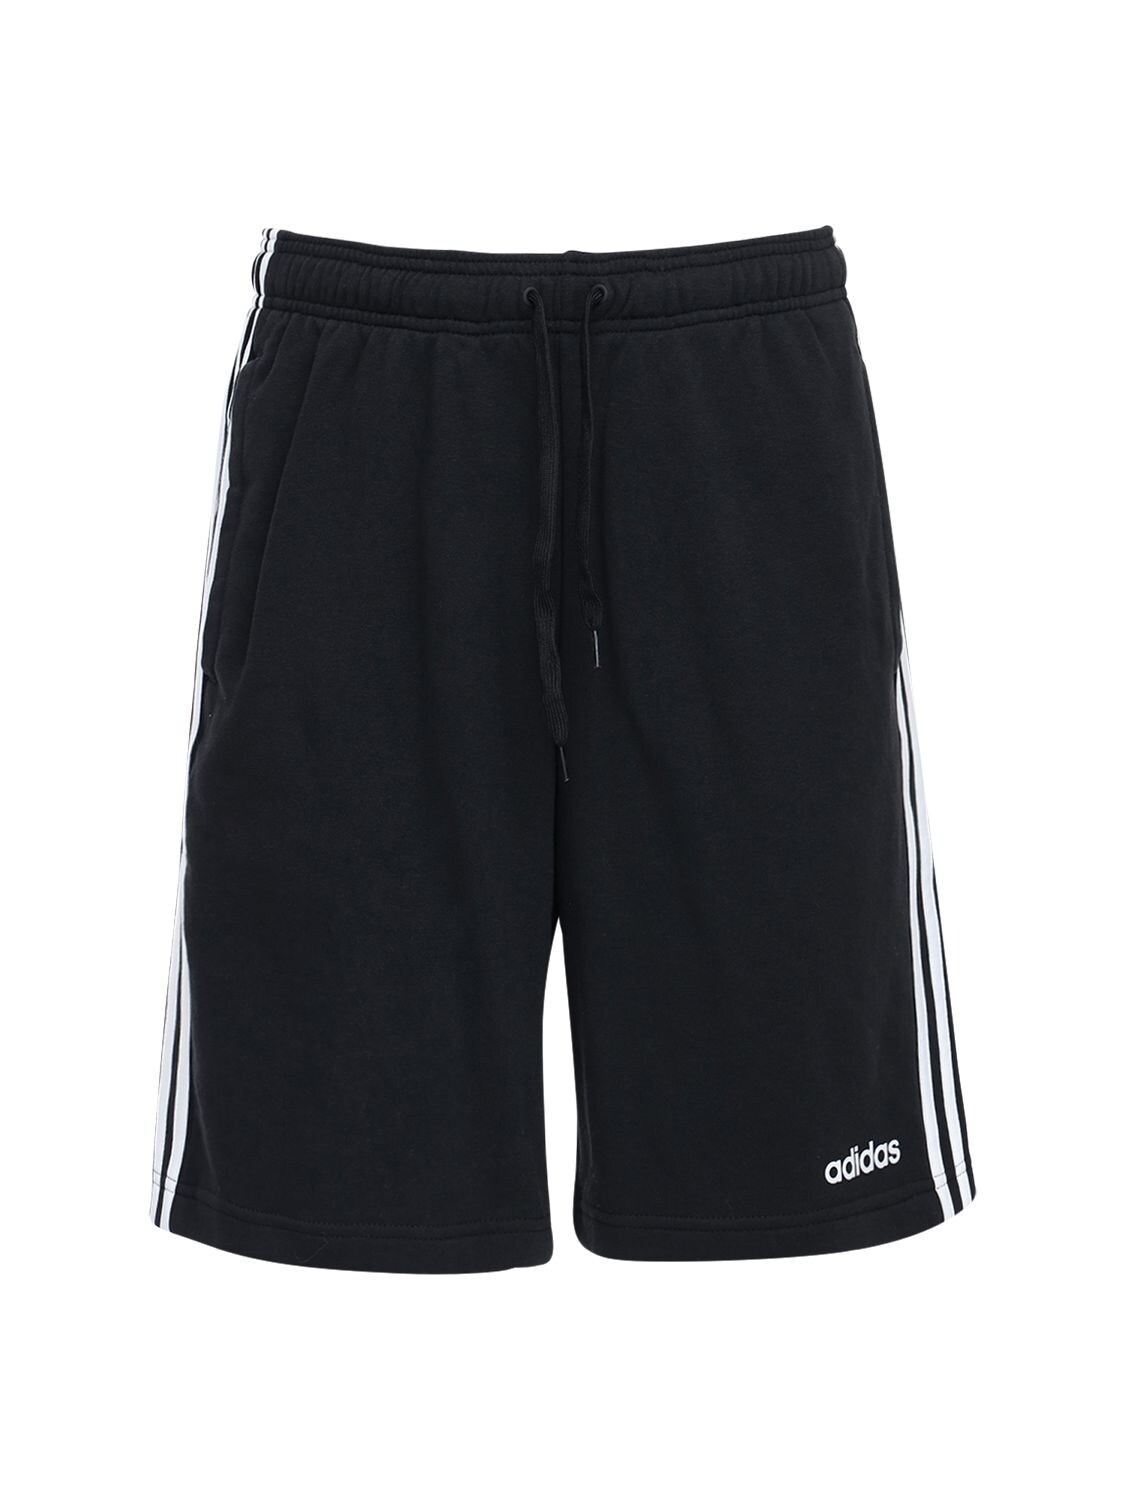 adidas 3 stripes french terry shorts